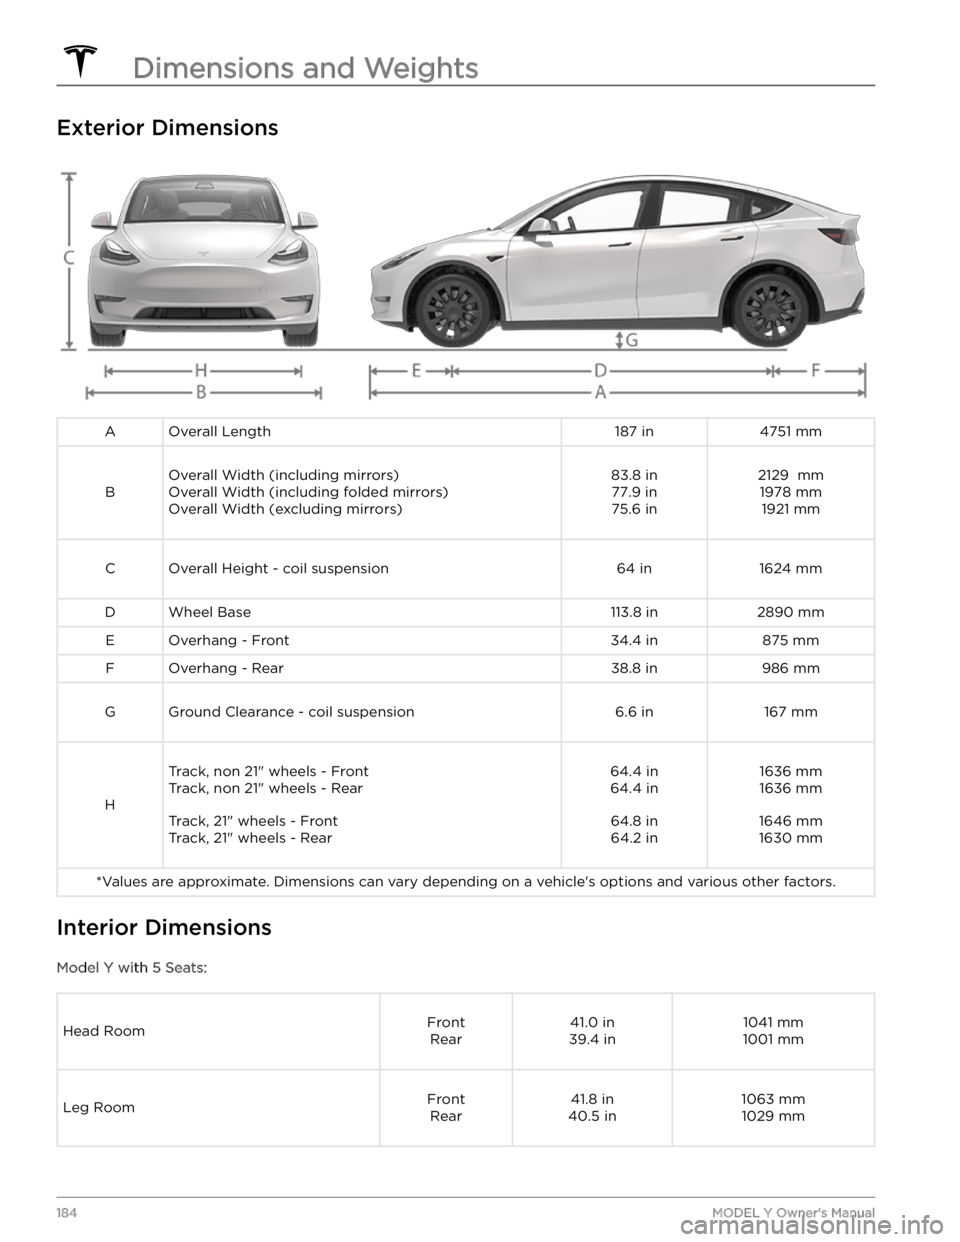 TESLA MODEL Y 2021  Owner´s Manual Exterior Dimensions
AOverall Length187 in4751 mm
B
Overall Width (including mirrors)Overall Width (including folded mirrors)Overall Width (excluding mirrors)83.8 in 77.9 in
75.6 in2129  mm 1978 mm1921